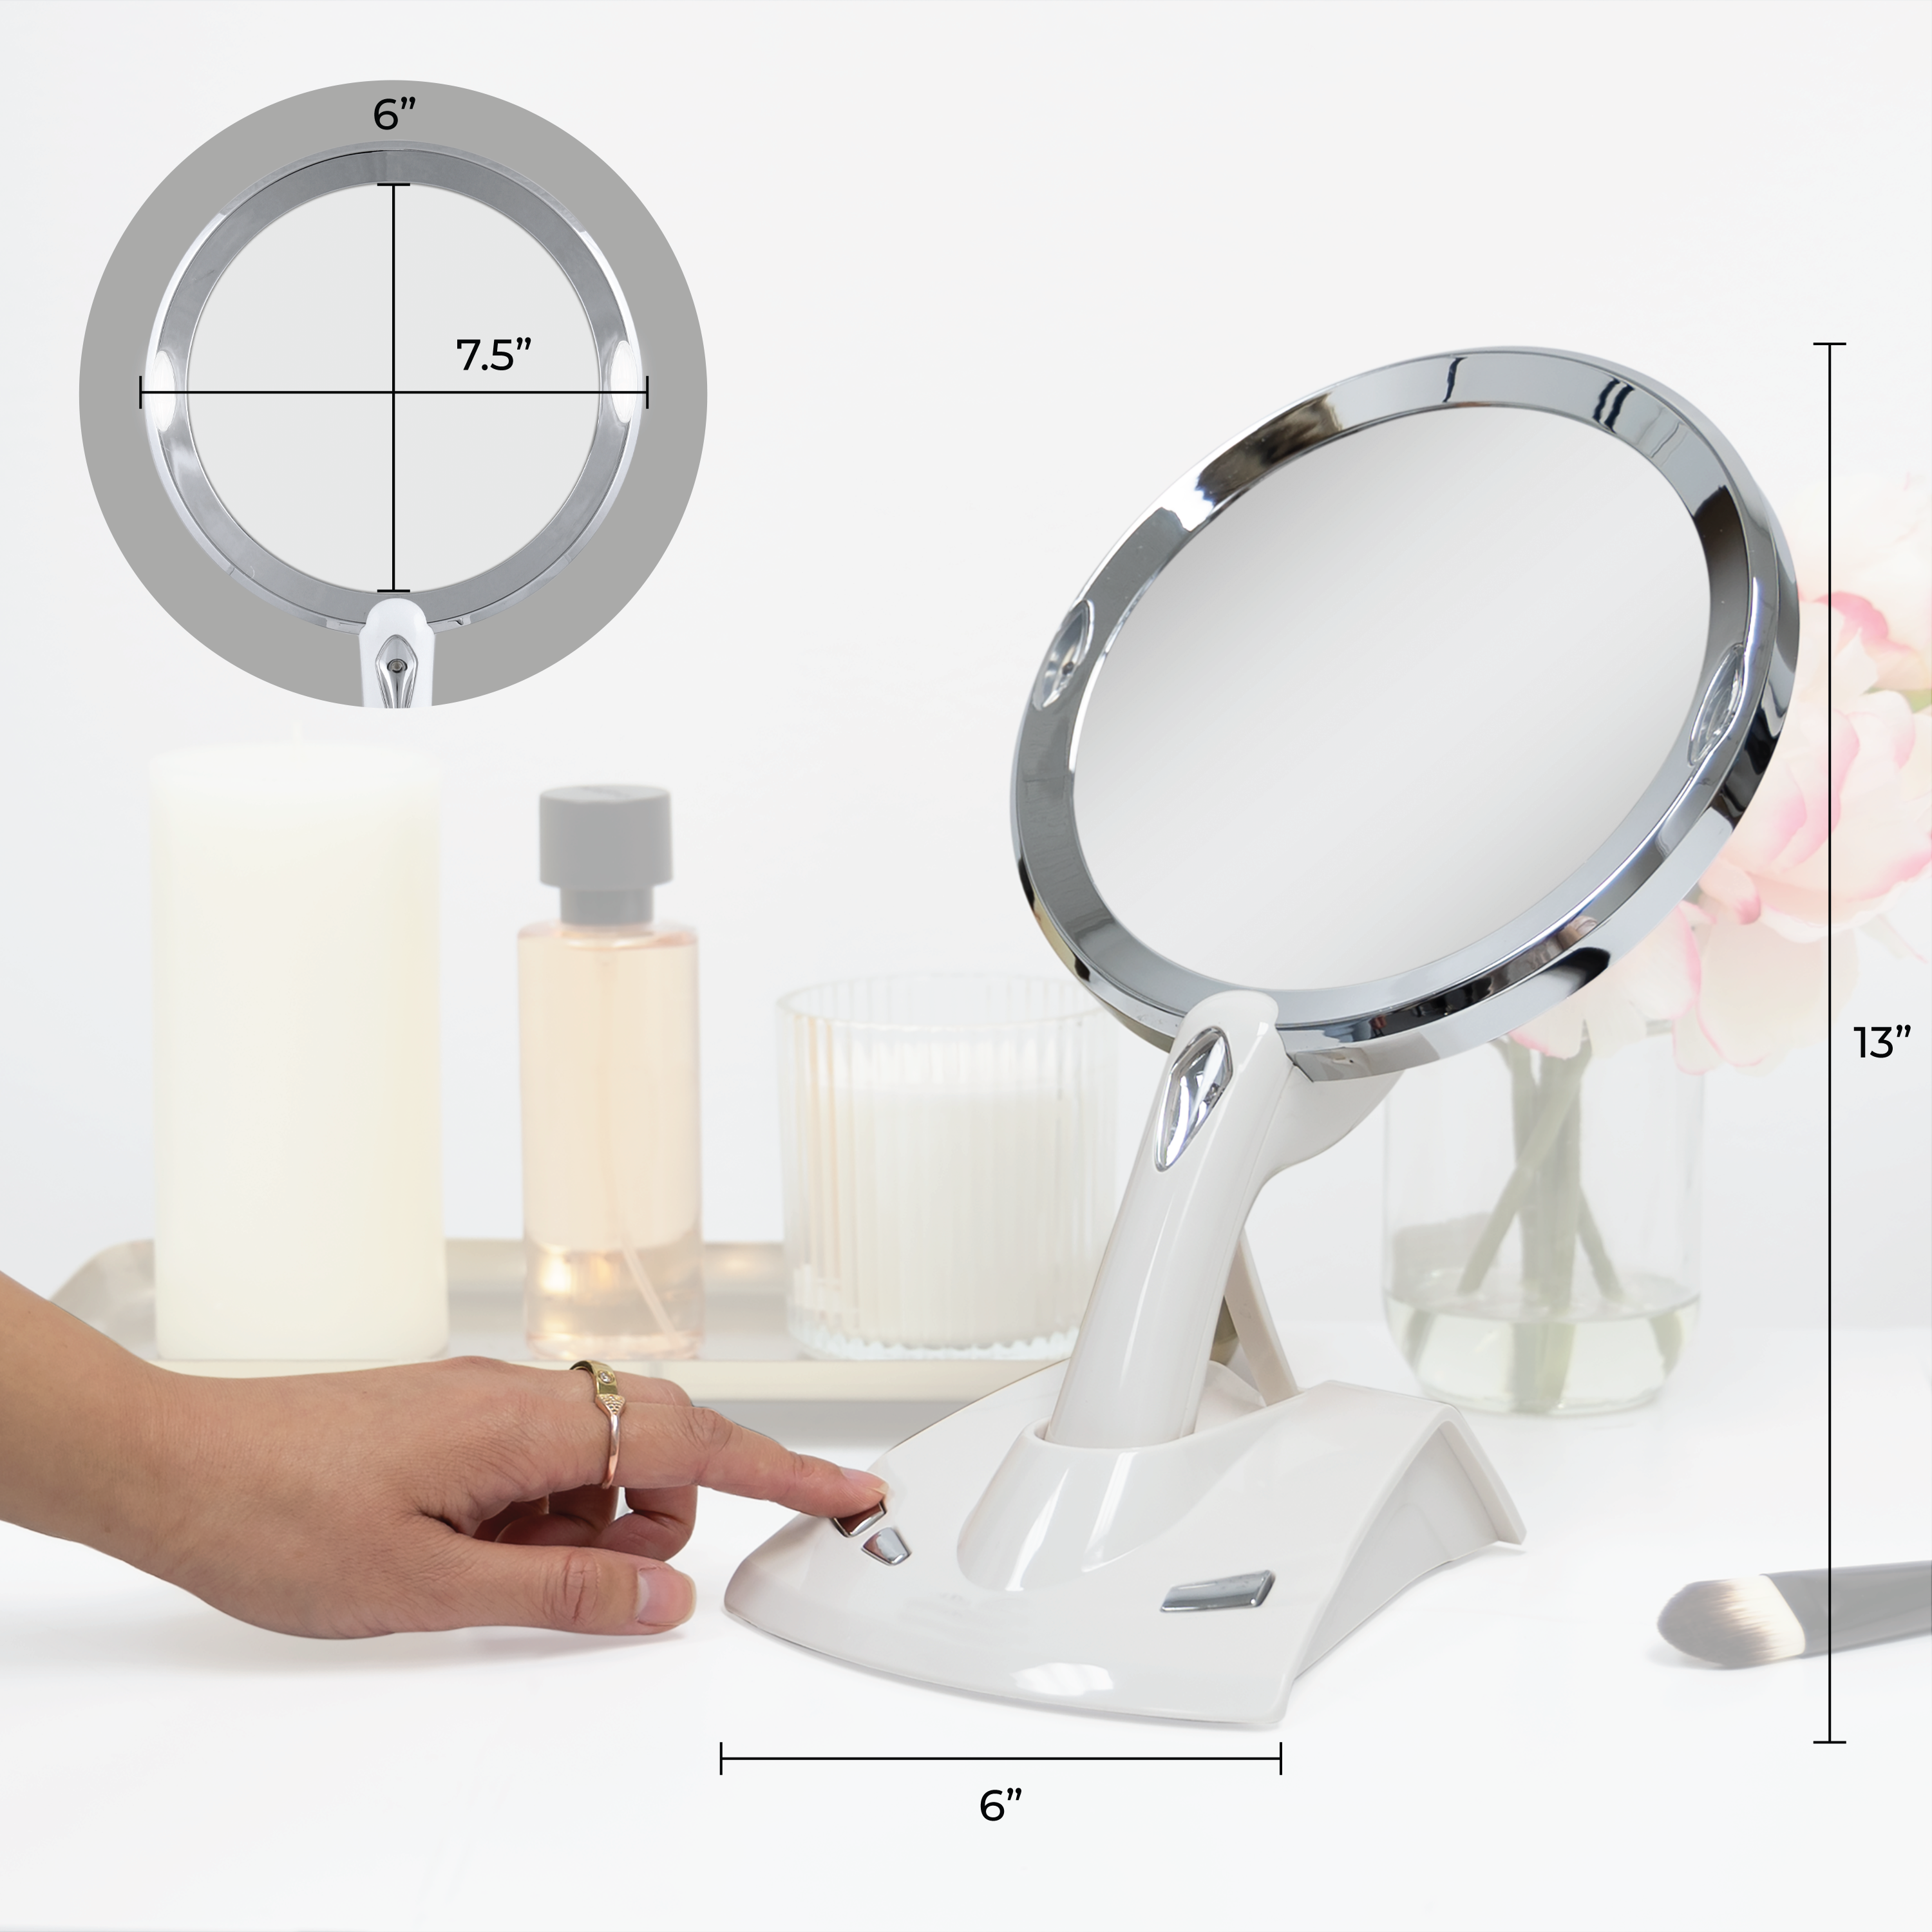 Power Zoom Lighted Makeup Mirror with Magnification